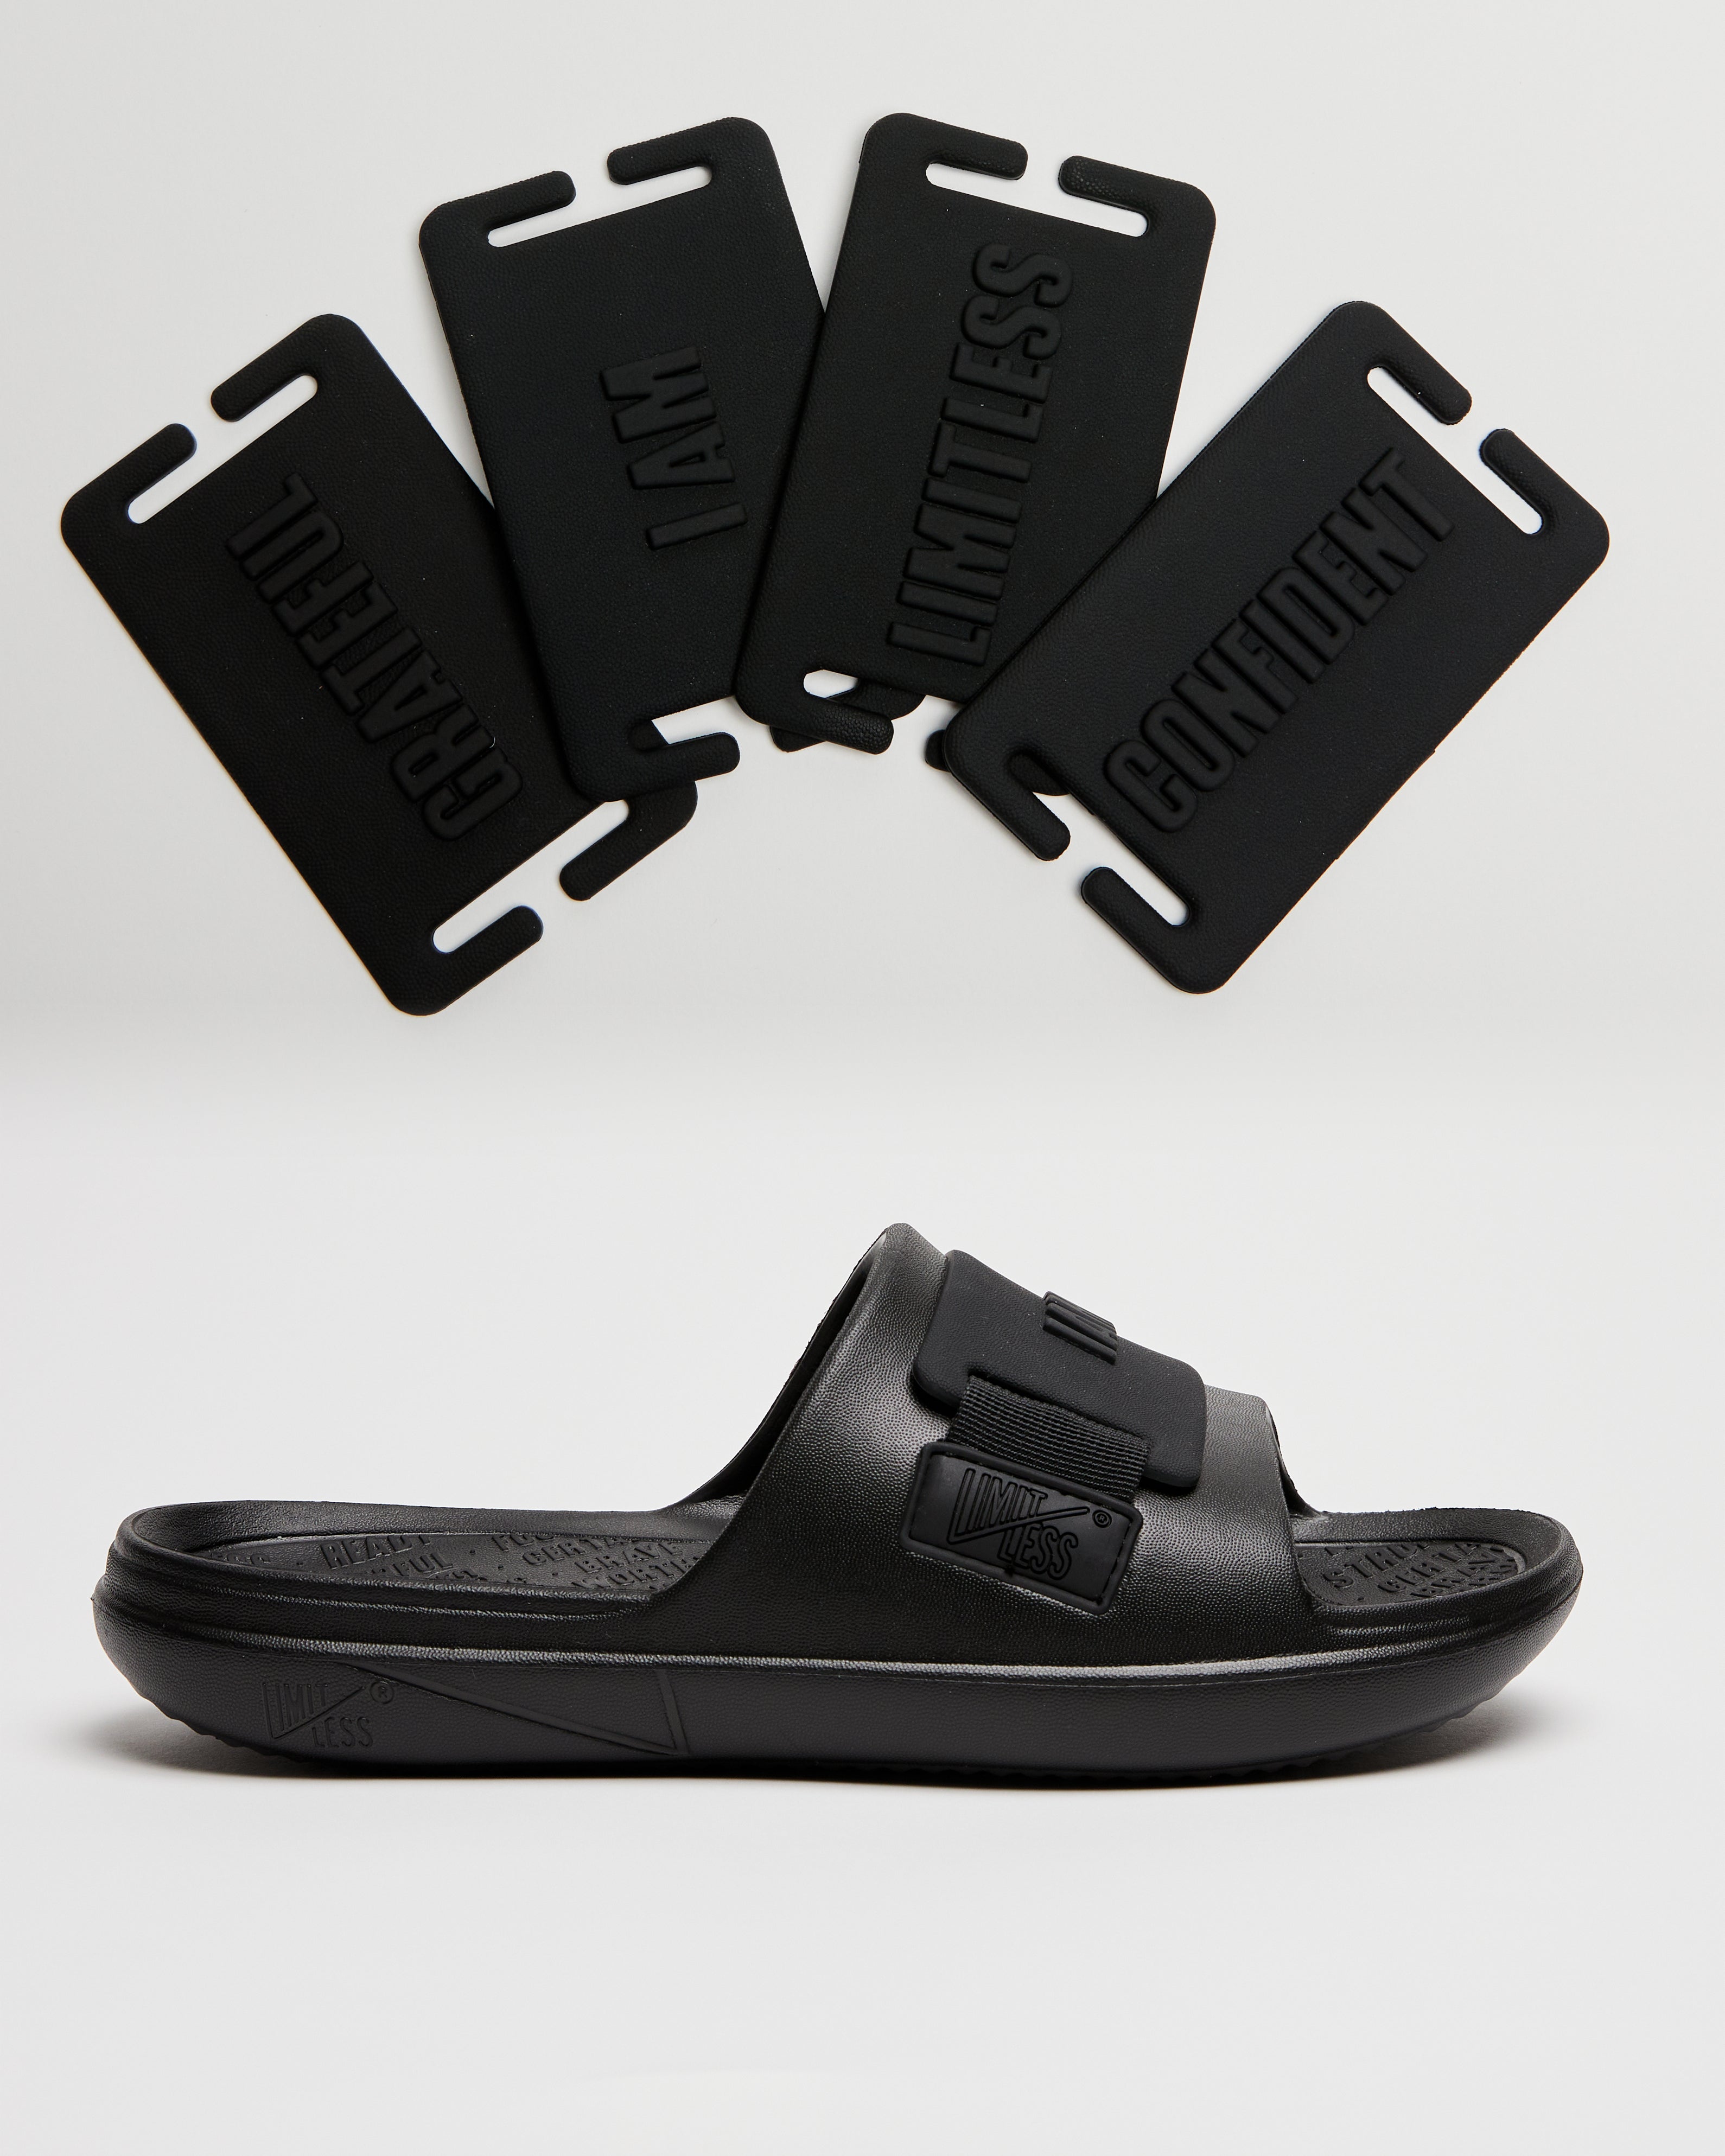 LIMITLESS SLIDES™ WITH ESSENTIAL TIBAH™ QUAD - TIMBERLINE HIGH SCHOOL EDITION